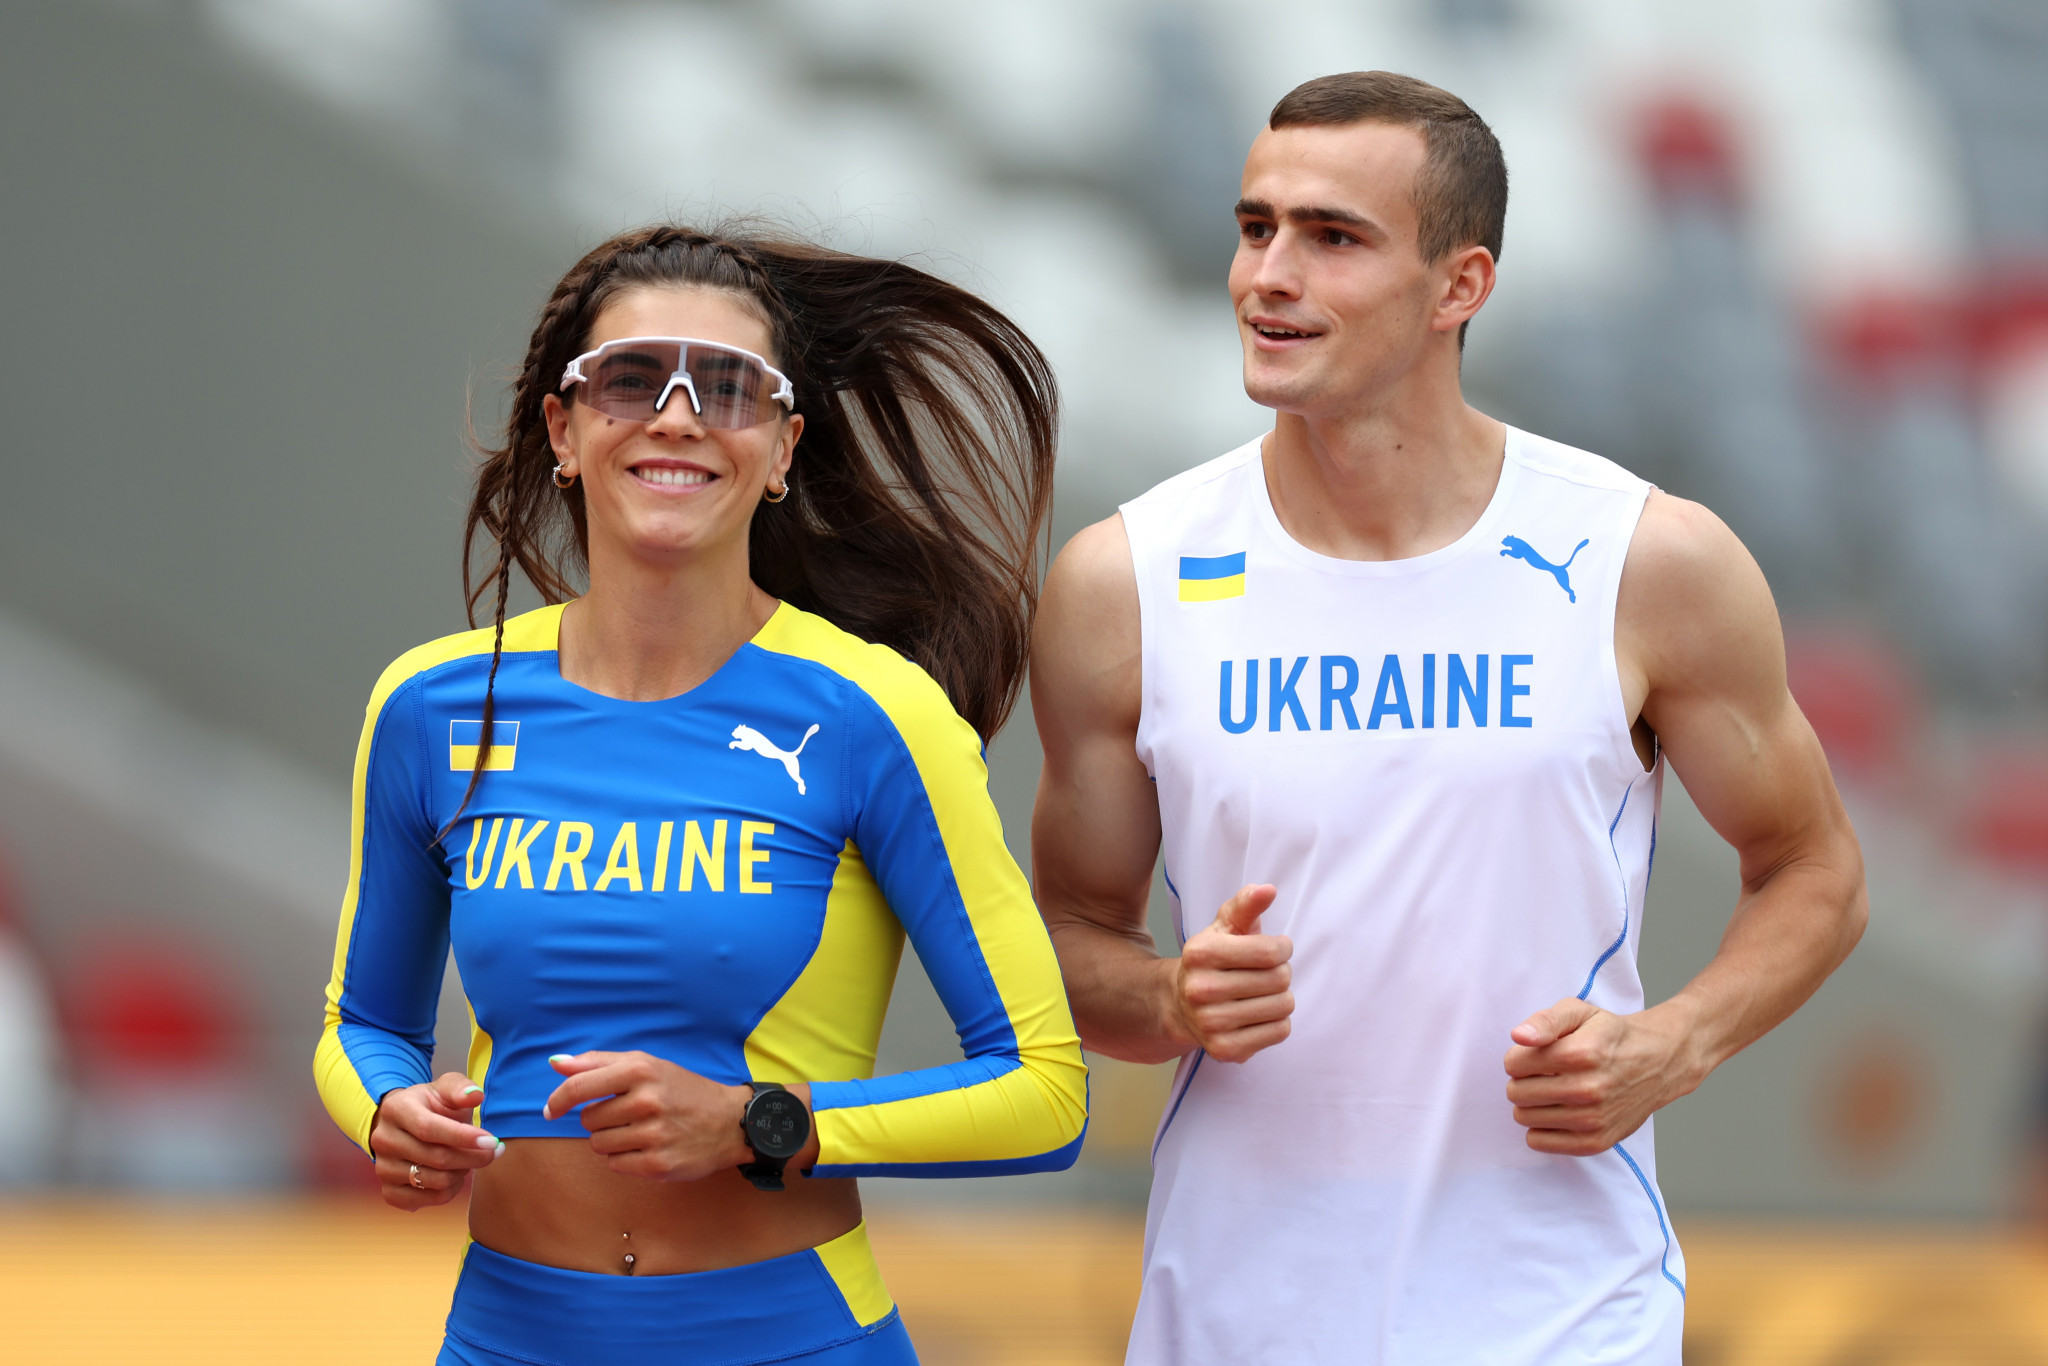 Ukraine has been represented by 29 athletes at the World Athletics Championships in Budapest, but is still awaiting its first medal ©Getty Images